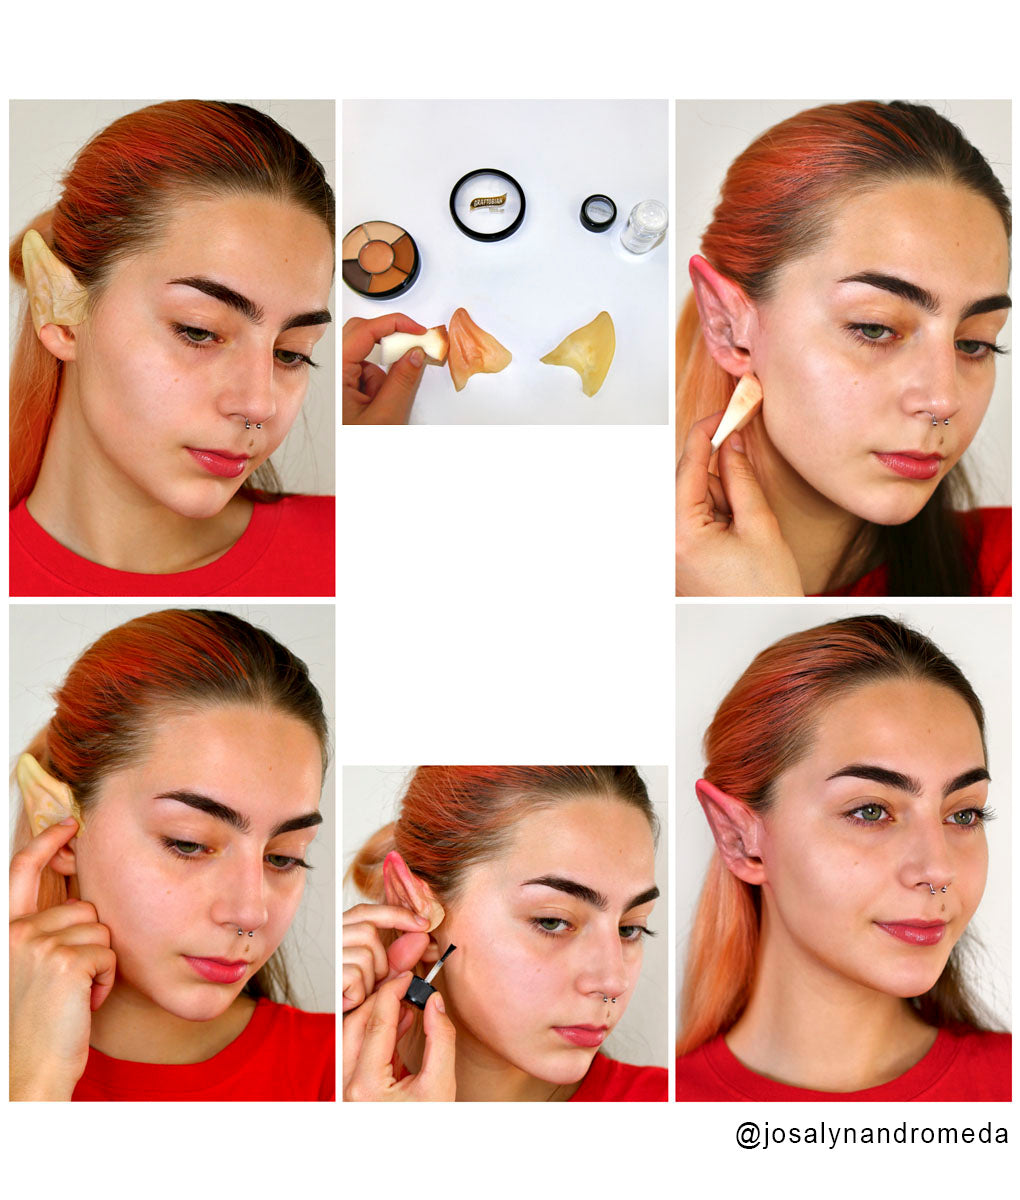  Graftobian Elf Ear Complete Makeup Kit - Elf Ears with Spirit  Gum Adhesive and Skin Tone Makeup - for Cosplay, Halloween Costumes, &  Theater - Full Color Instructions : Beauty & Personal Care